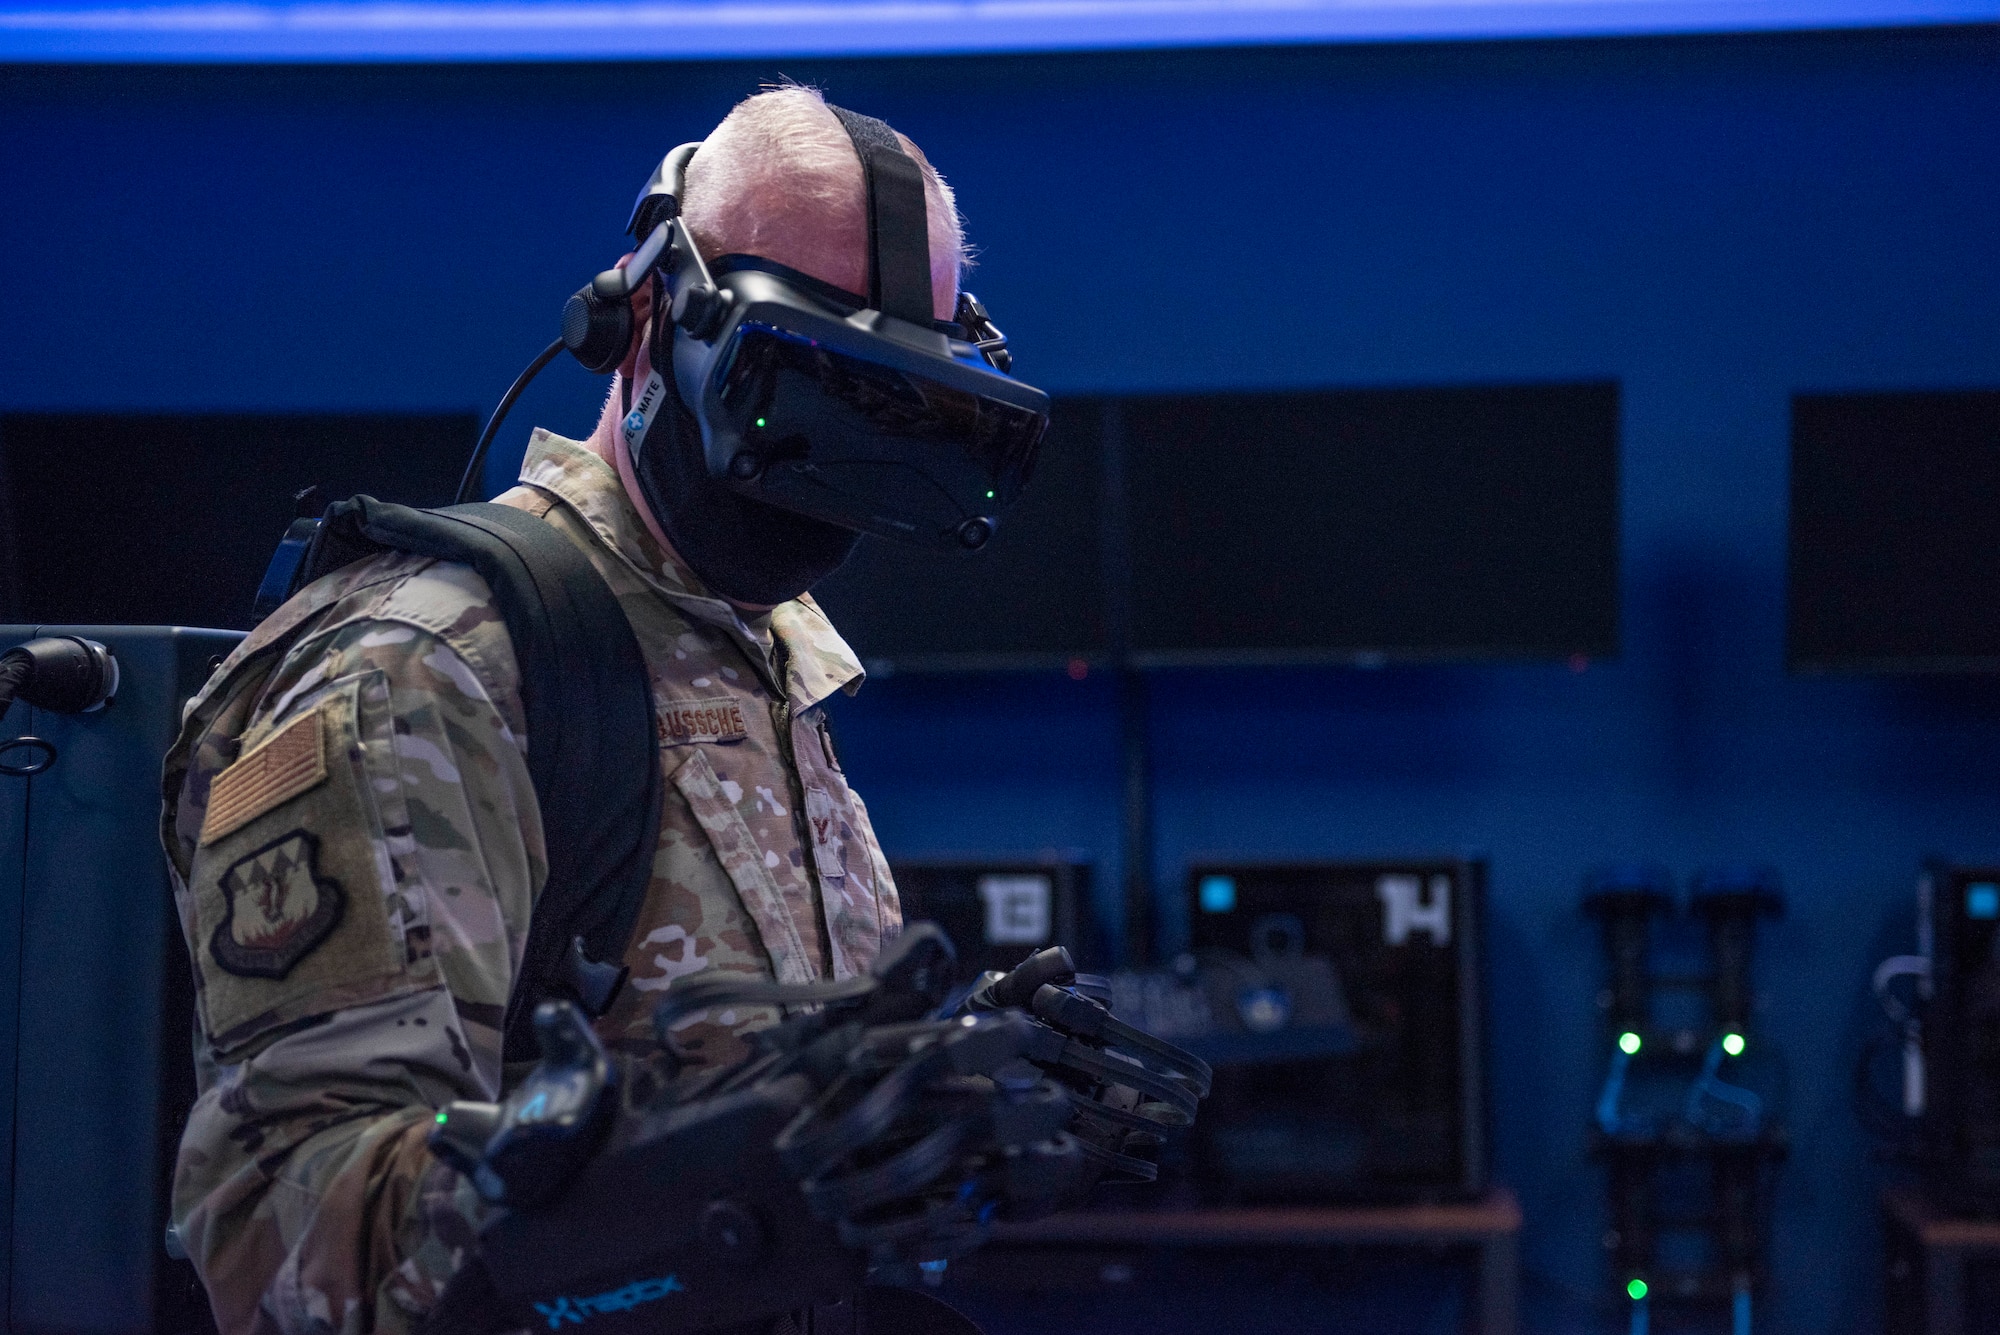 Col. Michael Fellona, 317th Airlift Wing vice commander, tests HaptX Gloves Development Kit 2 at Dyess Air Force Base, Texas, May 10, 2021. Leadership assigned to the 317th AW tested the DK2 Gloves where they saw first-hand how the gloves operated and could potentially integrate with the existing virtual reality training lab. (U.S. Air Force photo by Airman 1st Class Colin Hollowell)